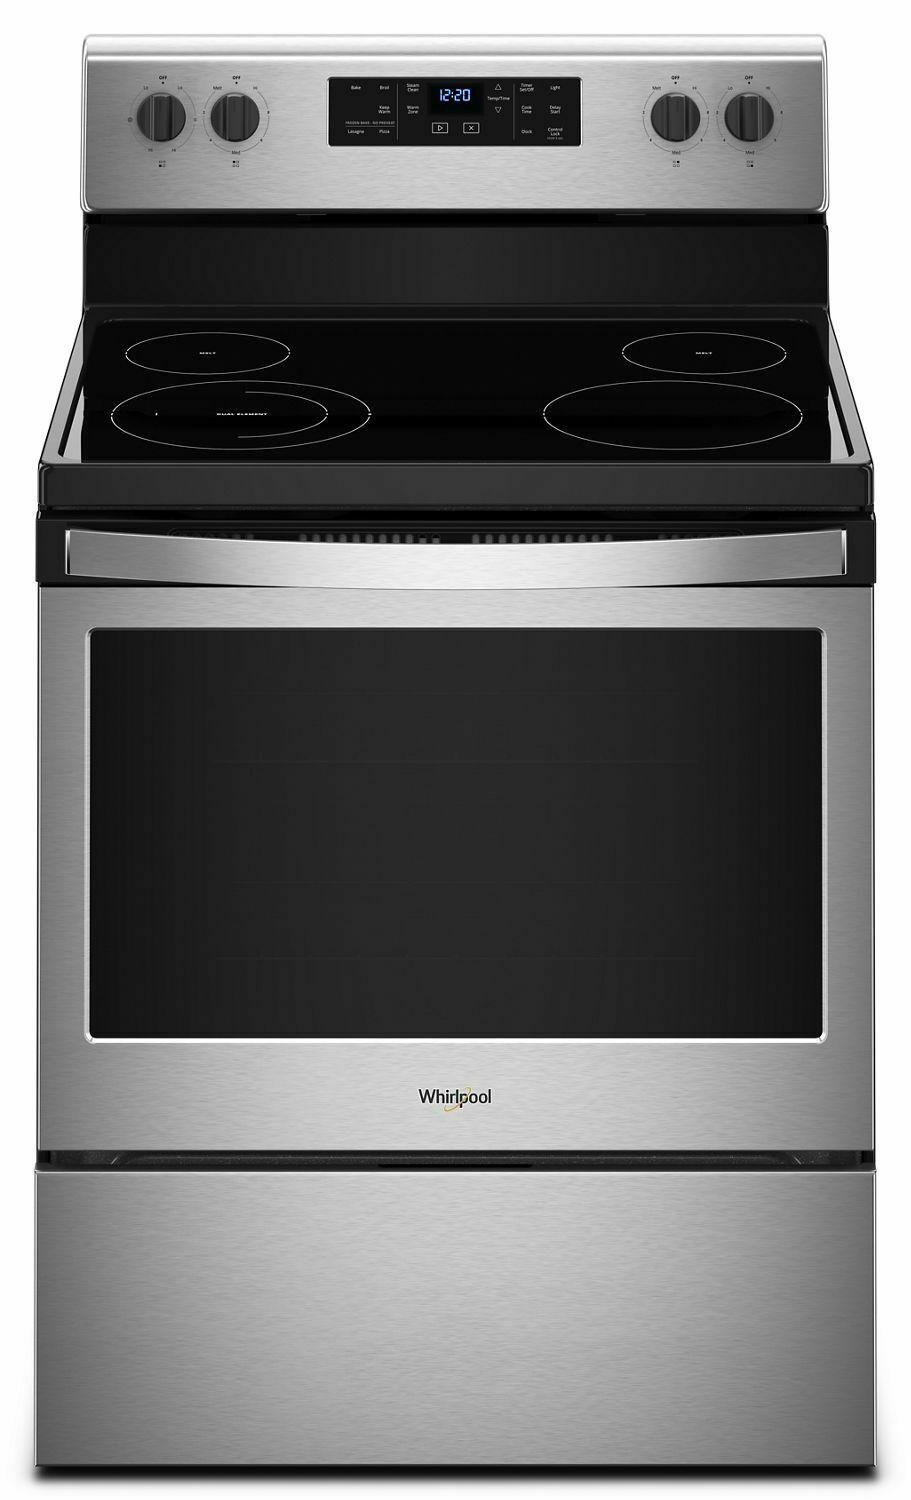 5.3 cu. ft. Freestanding Electric Range with 5 Elements - Black-on-Stainless